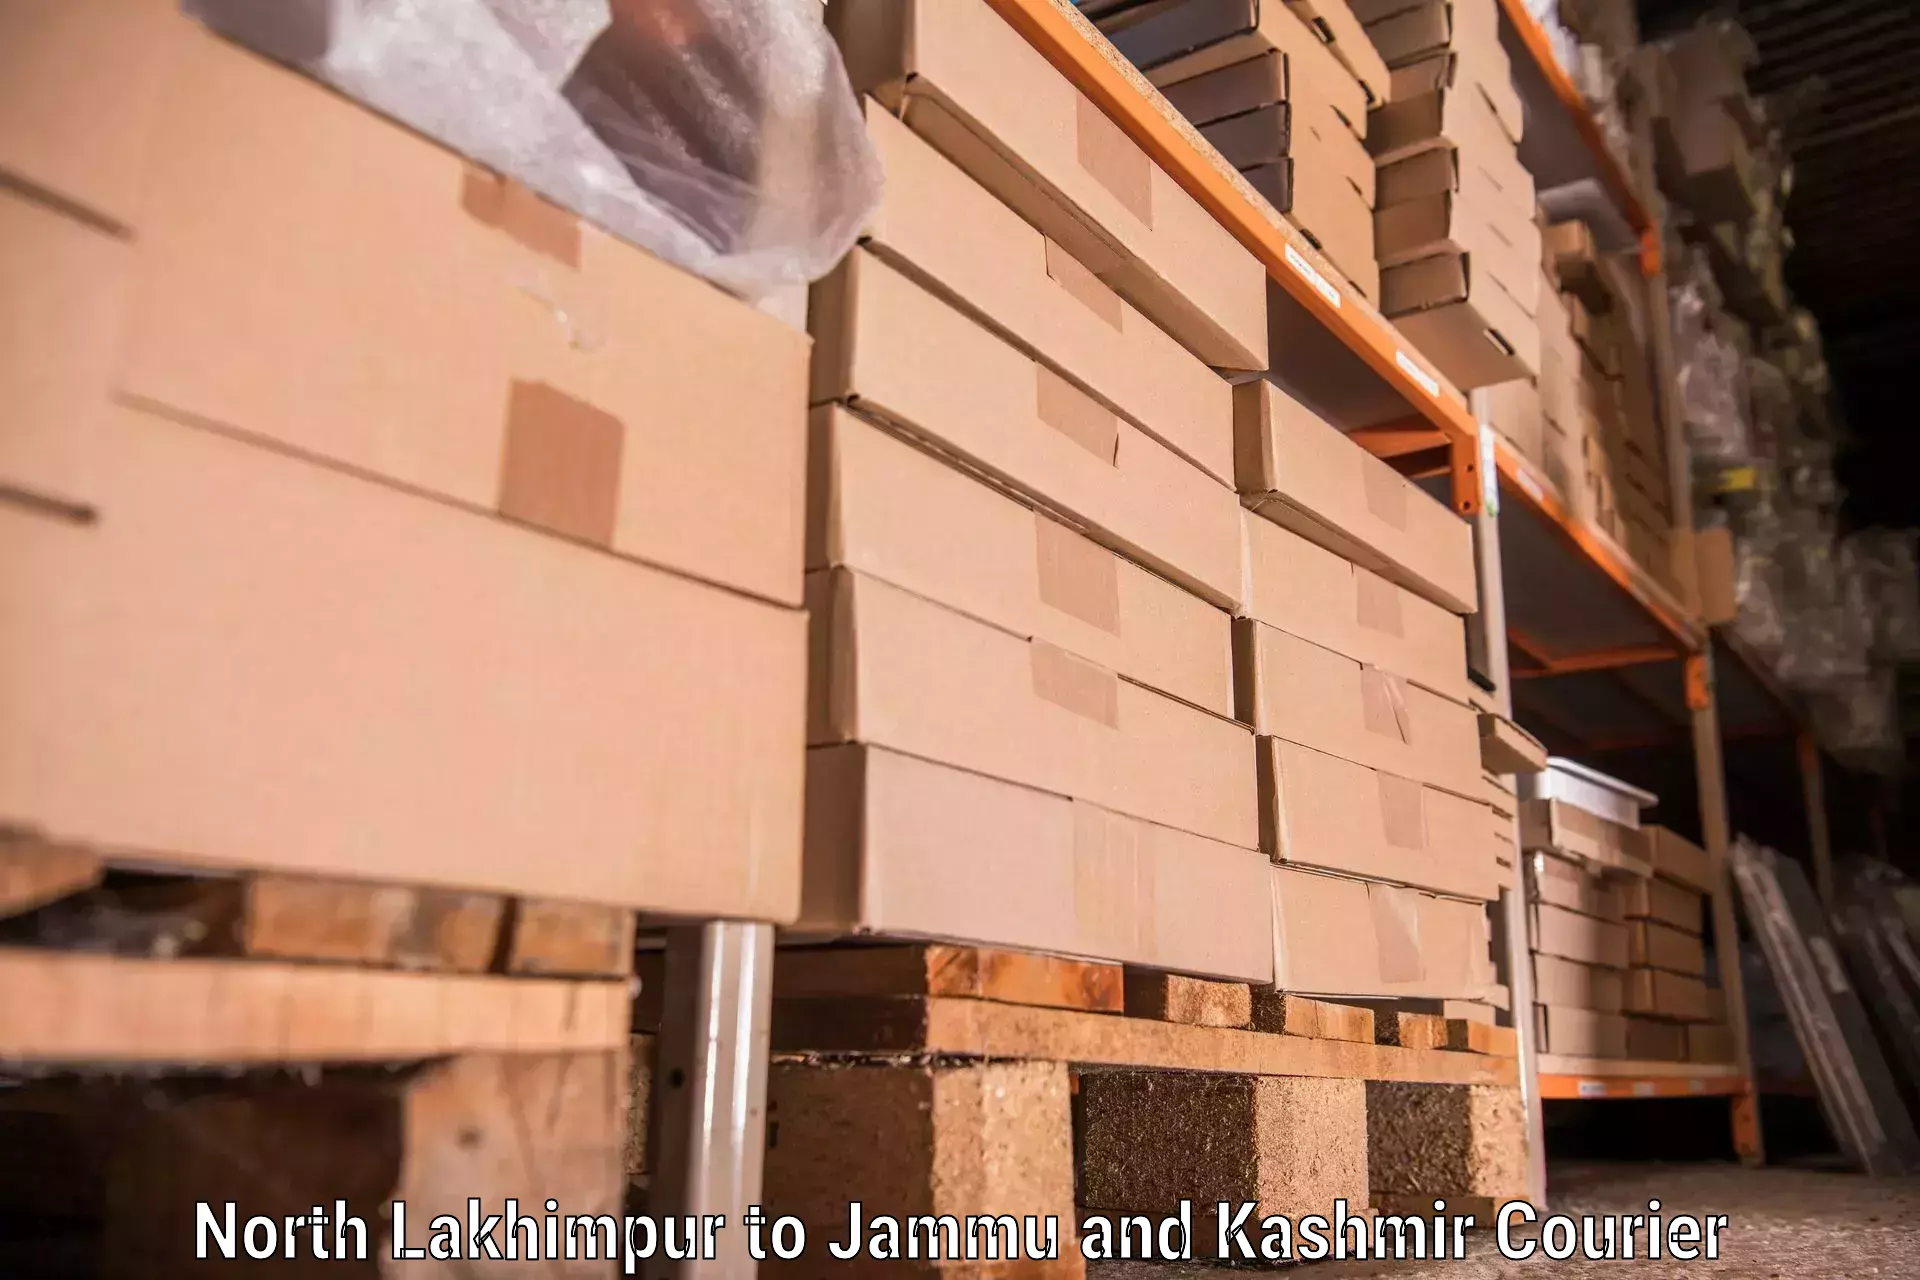 Furniture moving specialists North Lakhimpur to Jammu and Kashmir